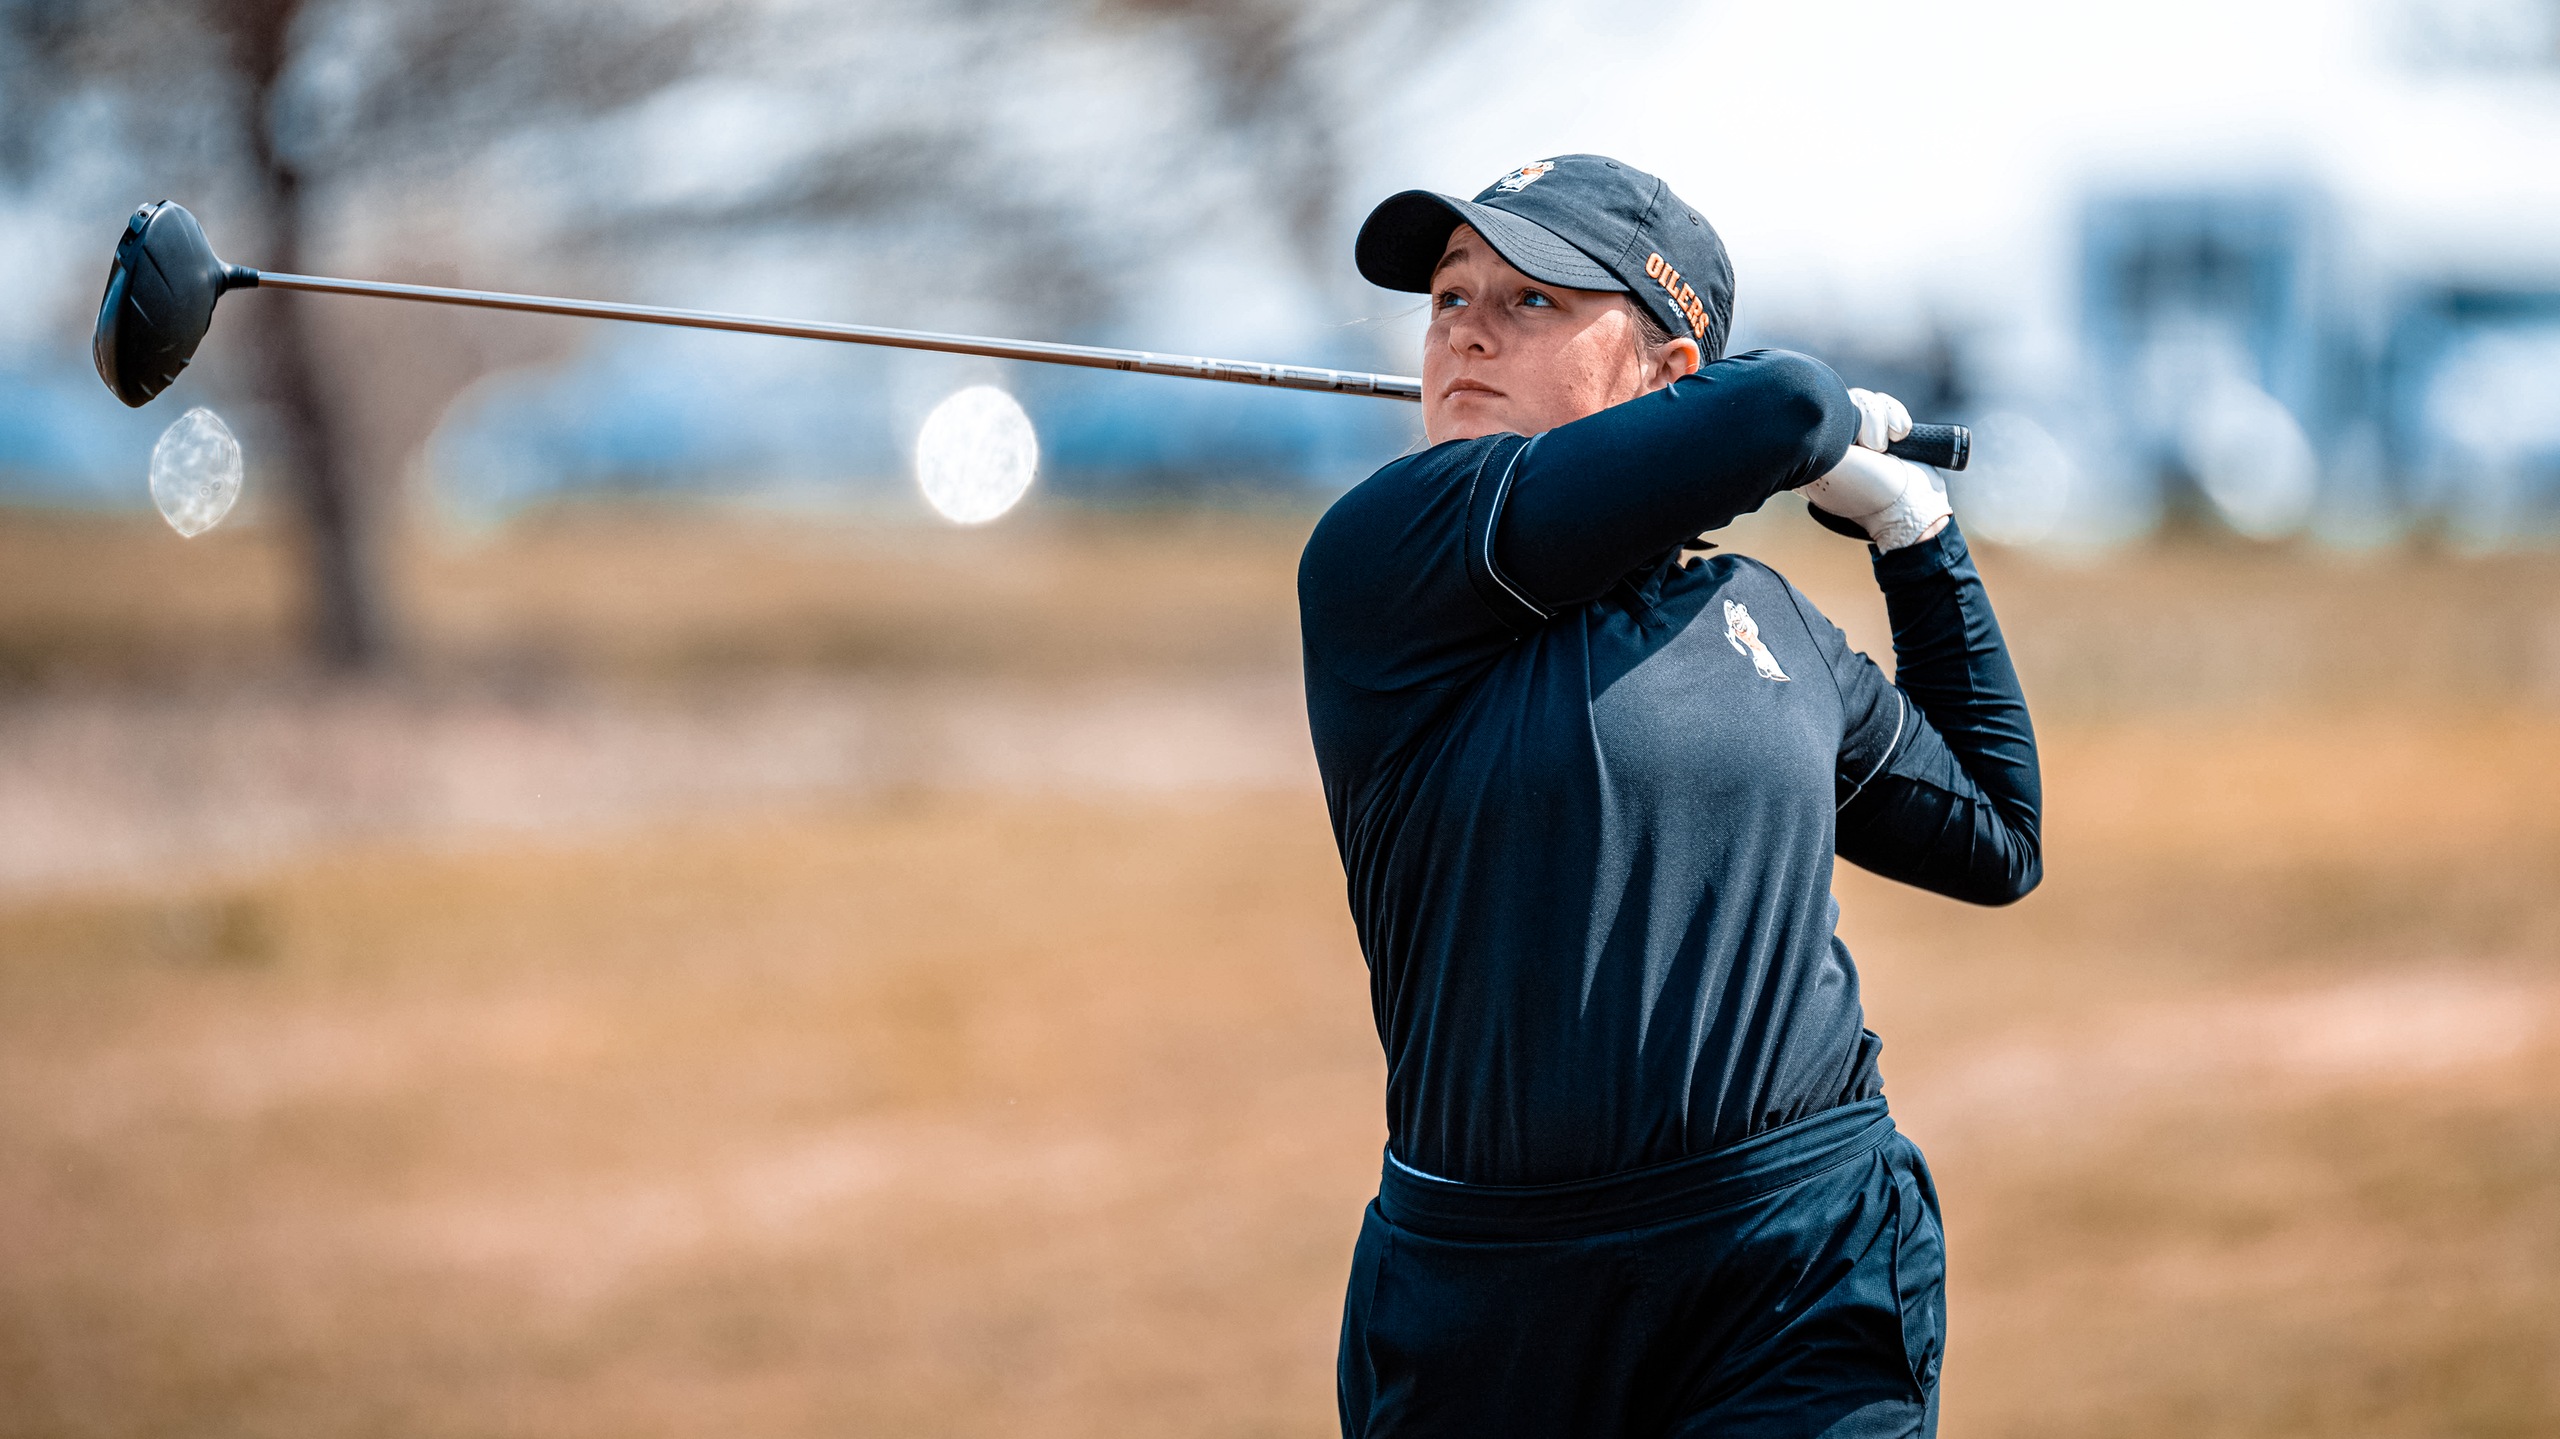 E. Mulcahy Shoots 69 | #6 Oilers Take Runner-Up at Findlay Spring Invite